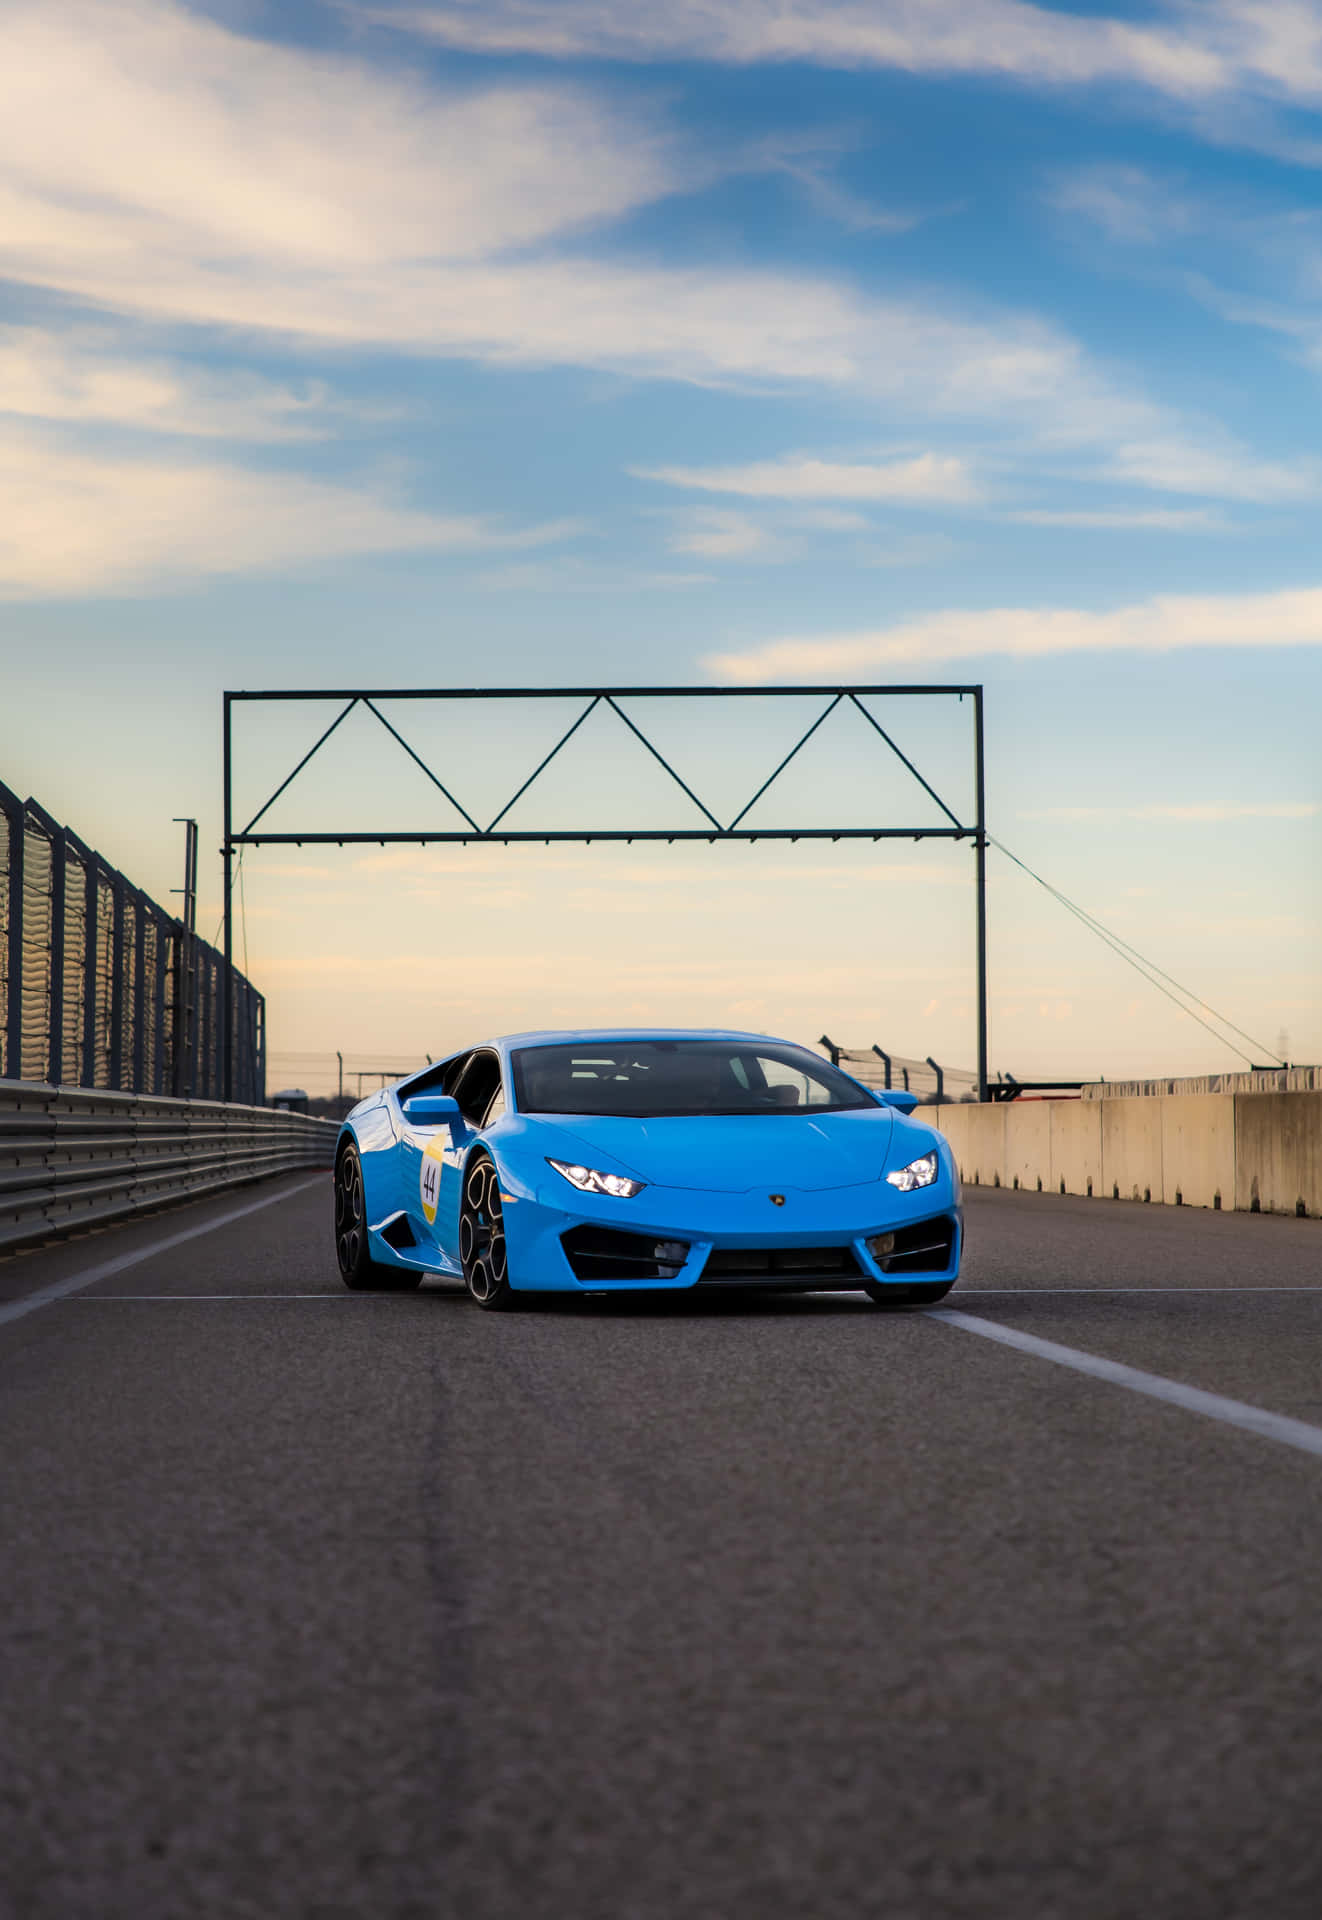 Zoom past the competition with a stylish blue Lamborghini. Wallpaper